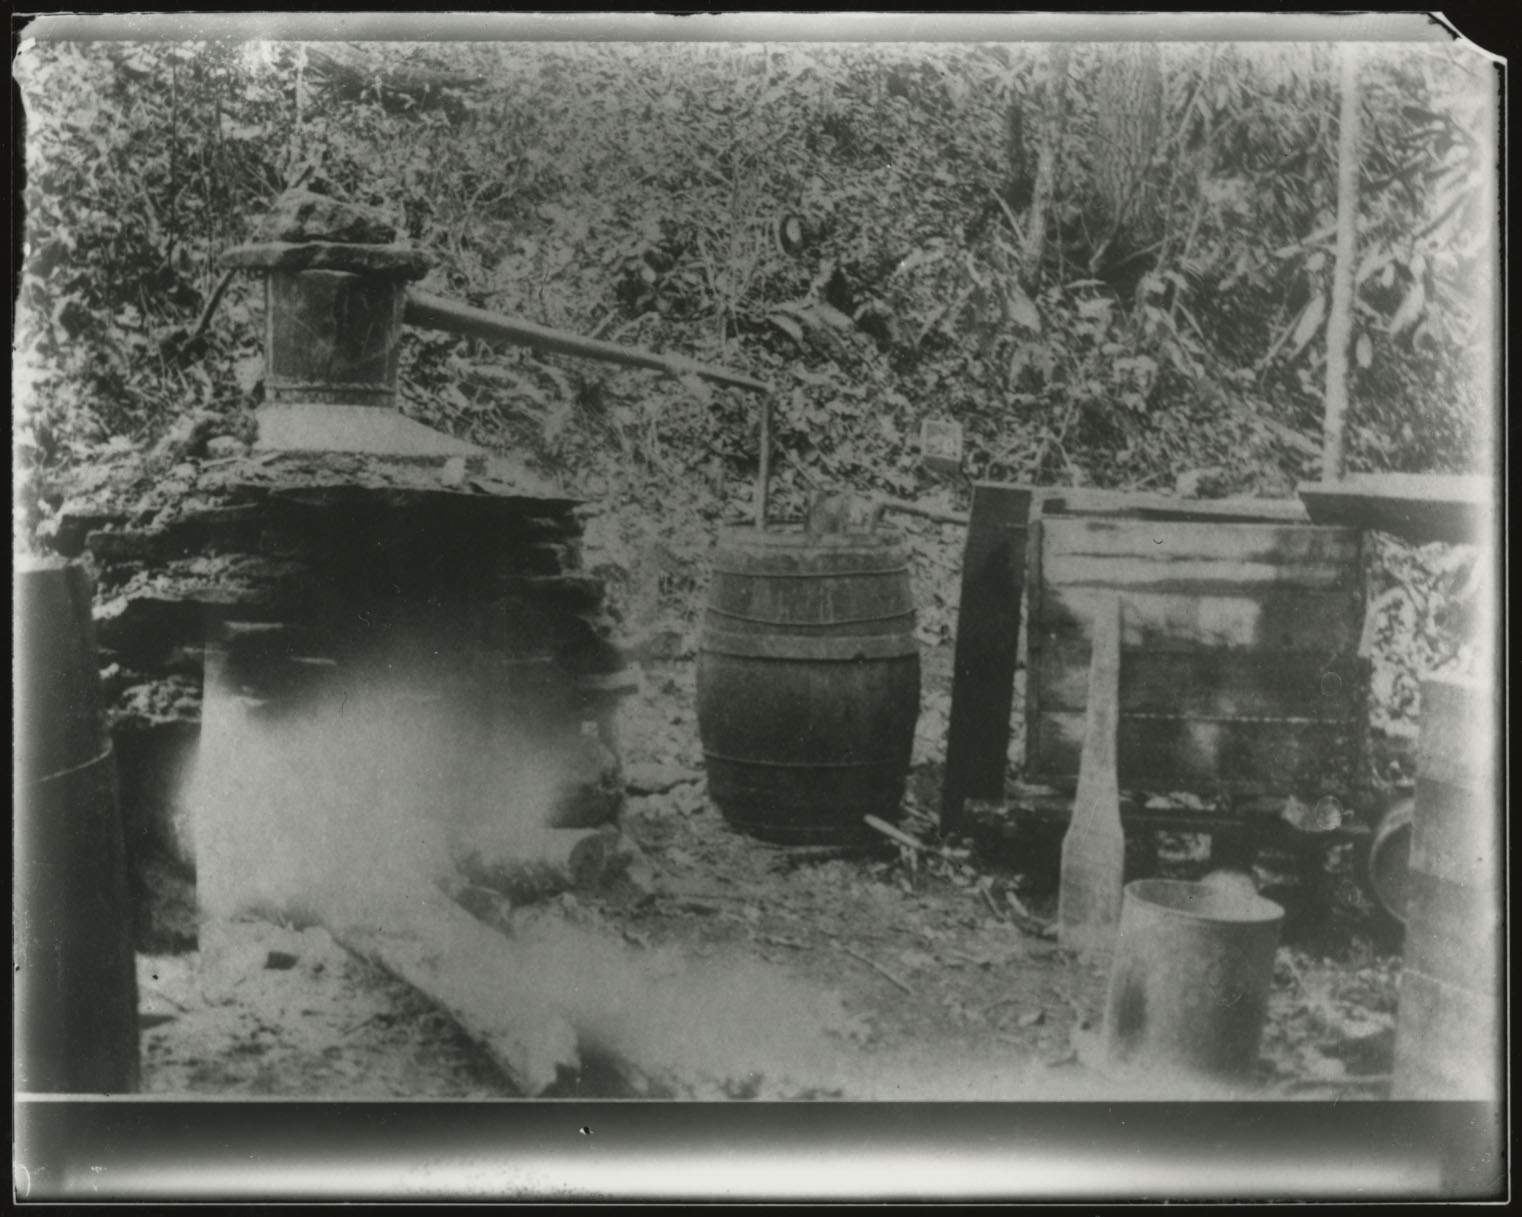 Print made from glass plate negative of a still near Ivanhoe, Virginia, c.1932